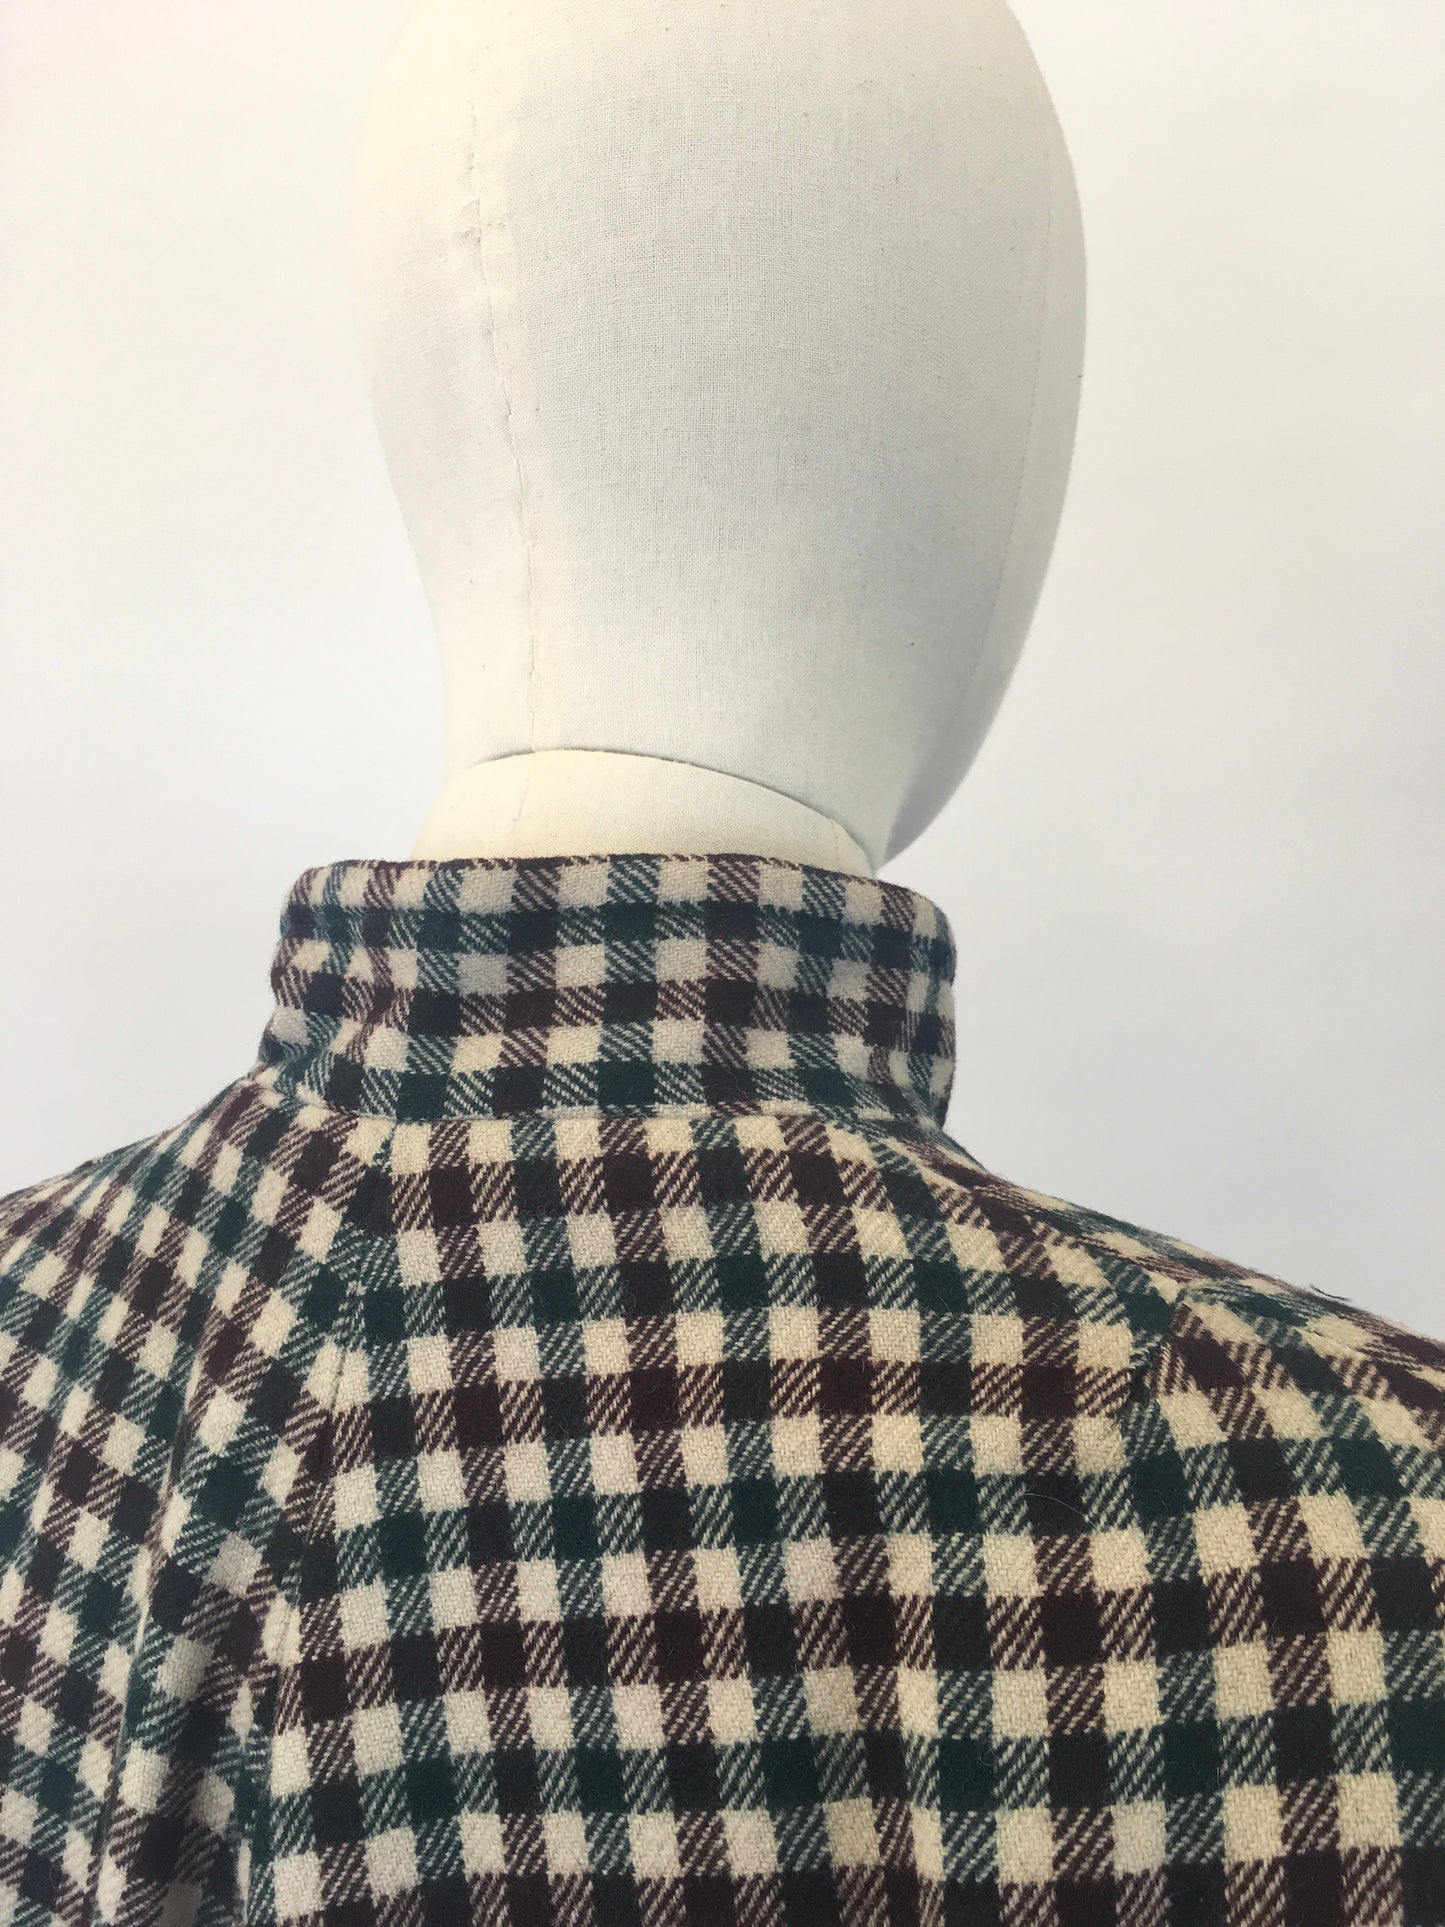 Original 1940's Fabulous Wool Swing Jacket - In Warming Brown and Forest Green